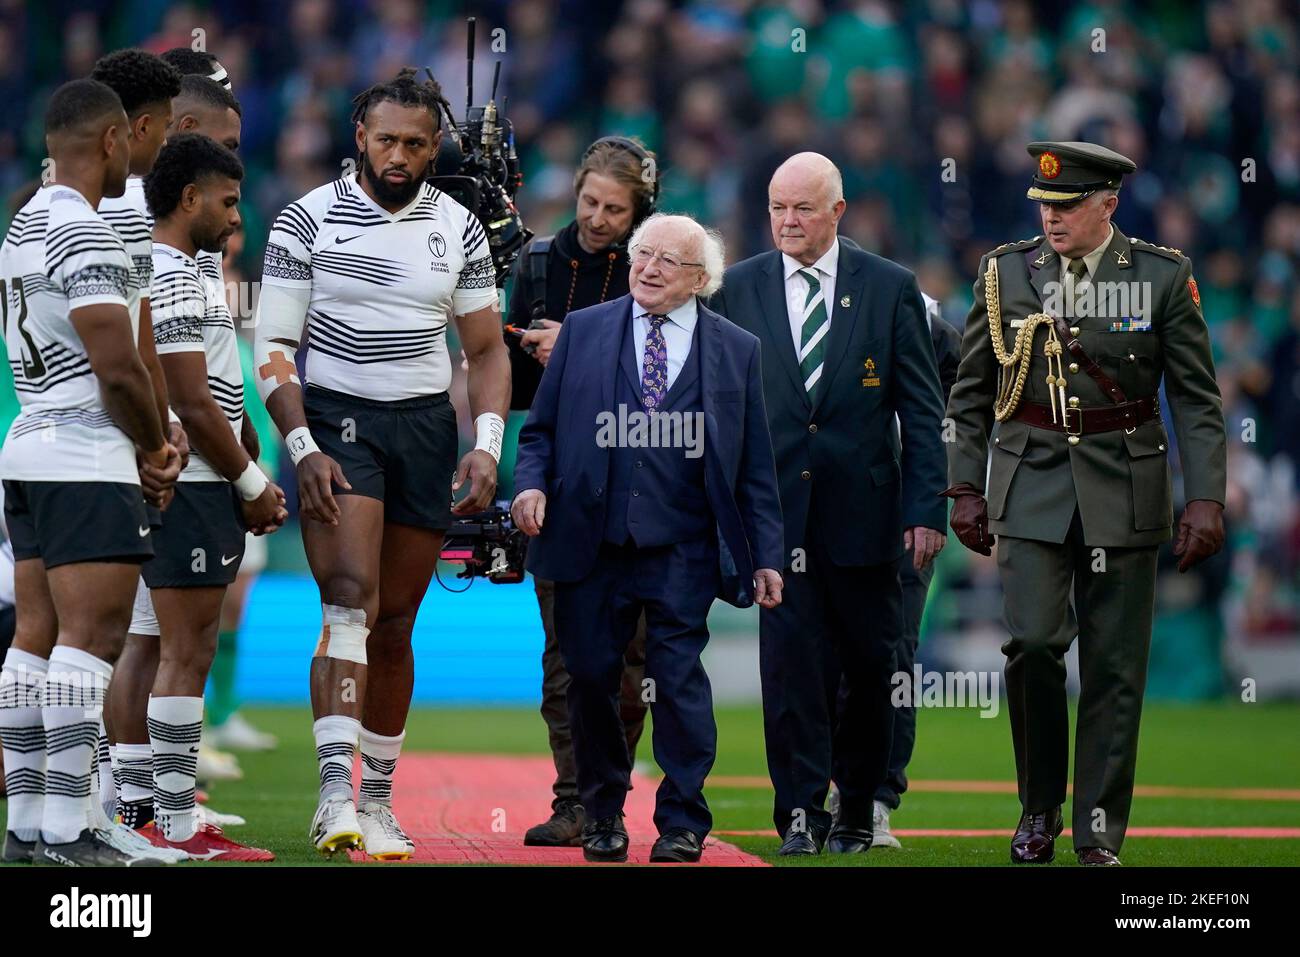 President of Ireland Michael D. Higgins (centre) is introduced to member of the Fiji team by Jiuta Wainiqolo (centre left) before the Autumn International match at the Aviva Stadium in Dublin, Ireland. Picture date: Saturday November 12, 2022. Stock Photo